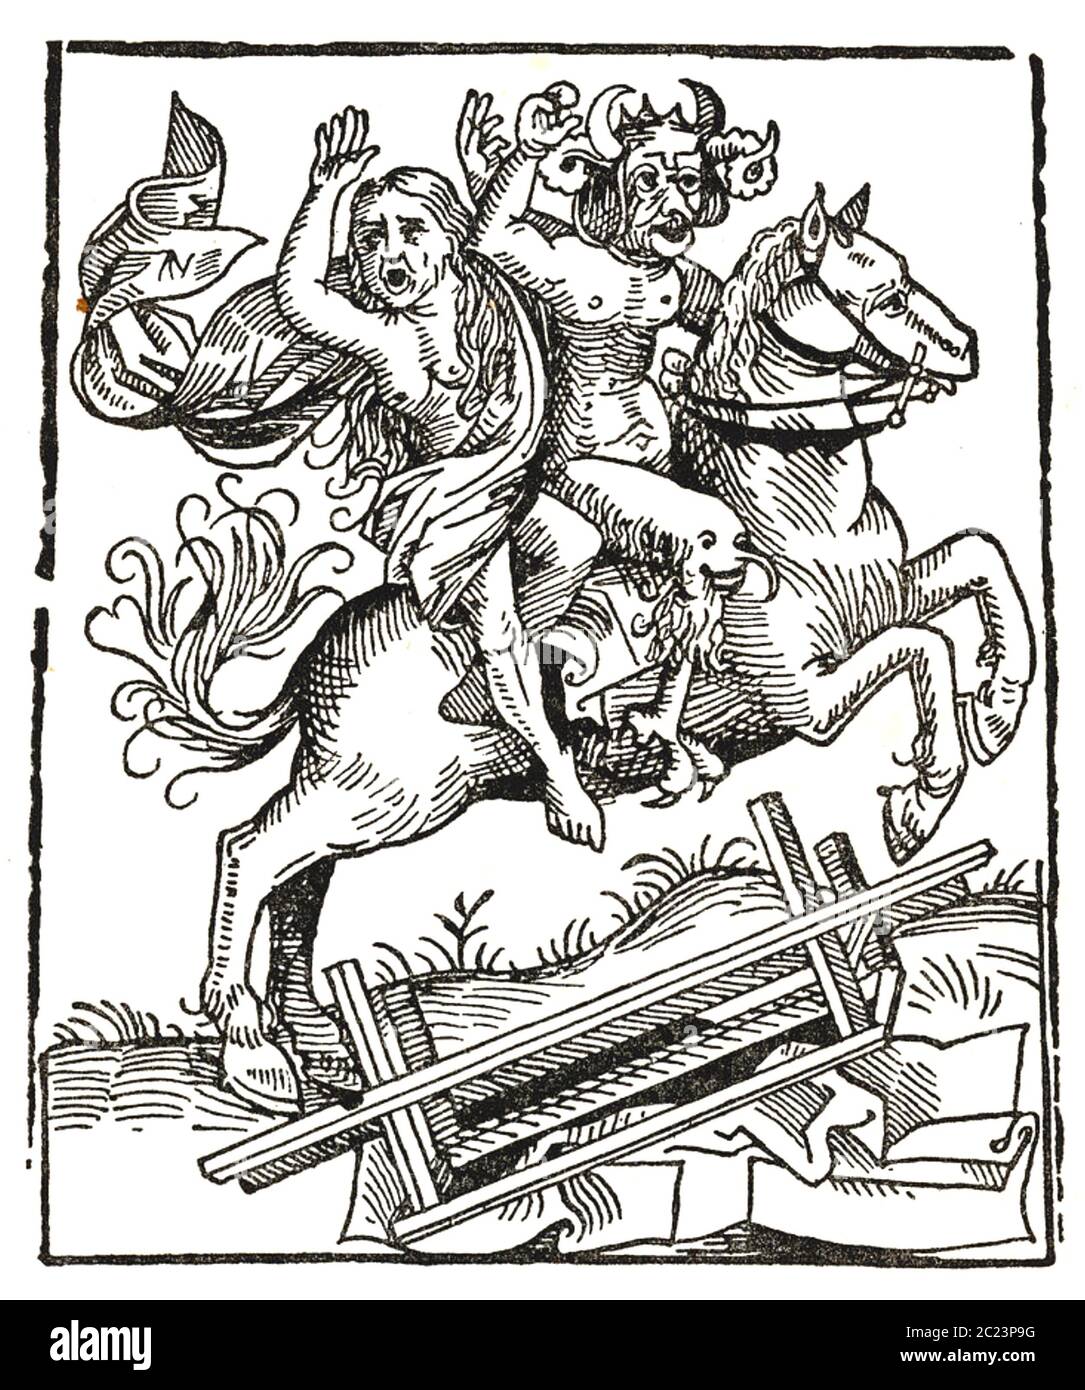 WITCH OF BERKELEY Medieval English legend. Woodcut from the Nuremberg Chronicle  showing the witch being carried off by the Devil. Stock Photo